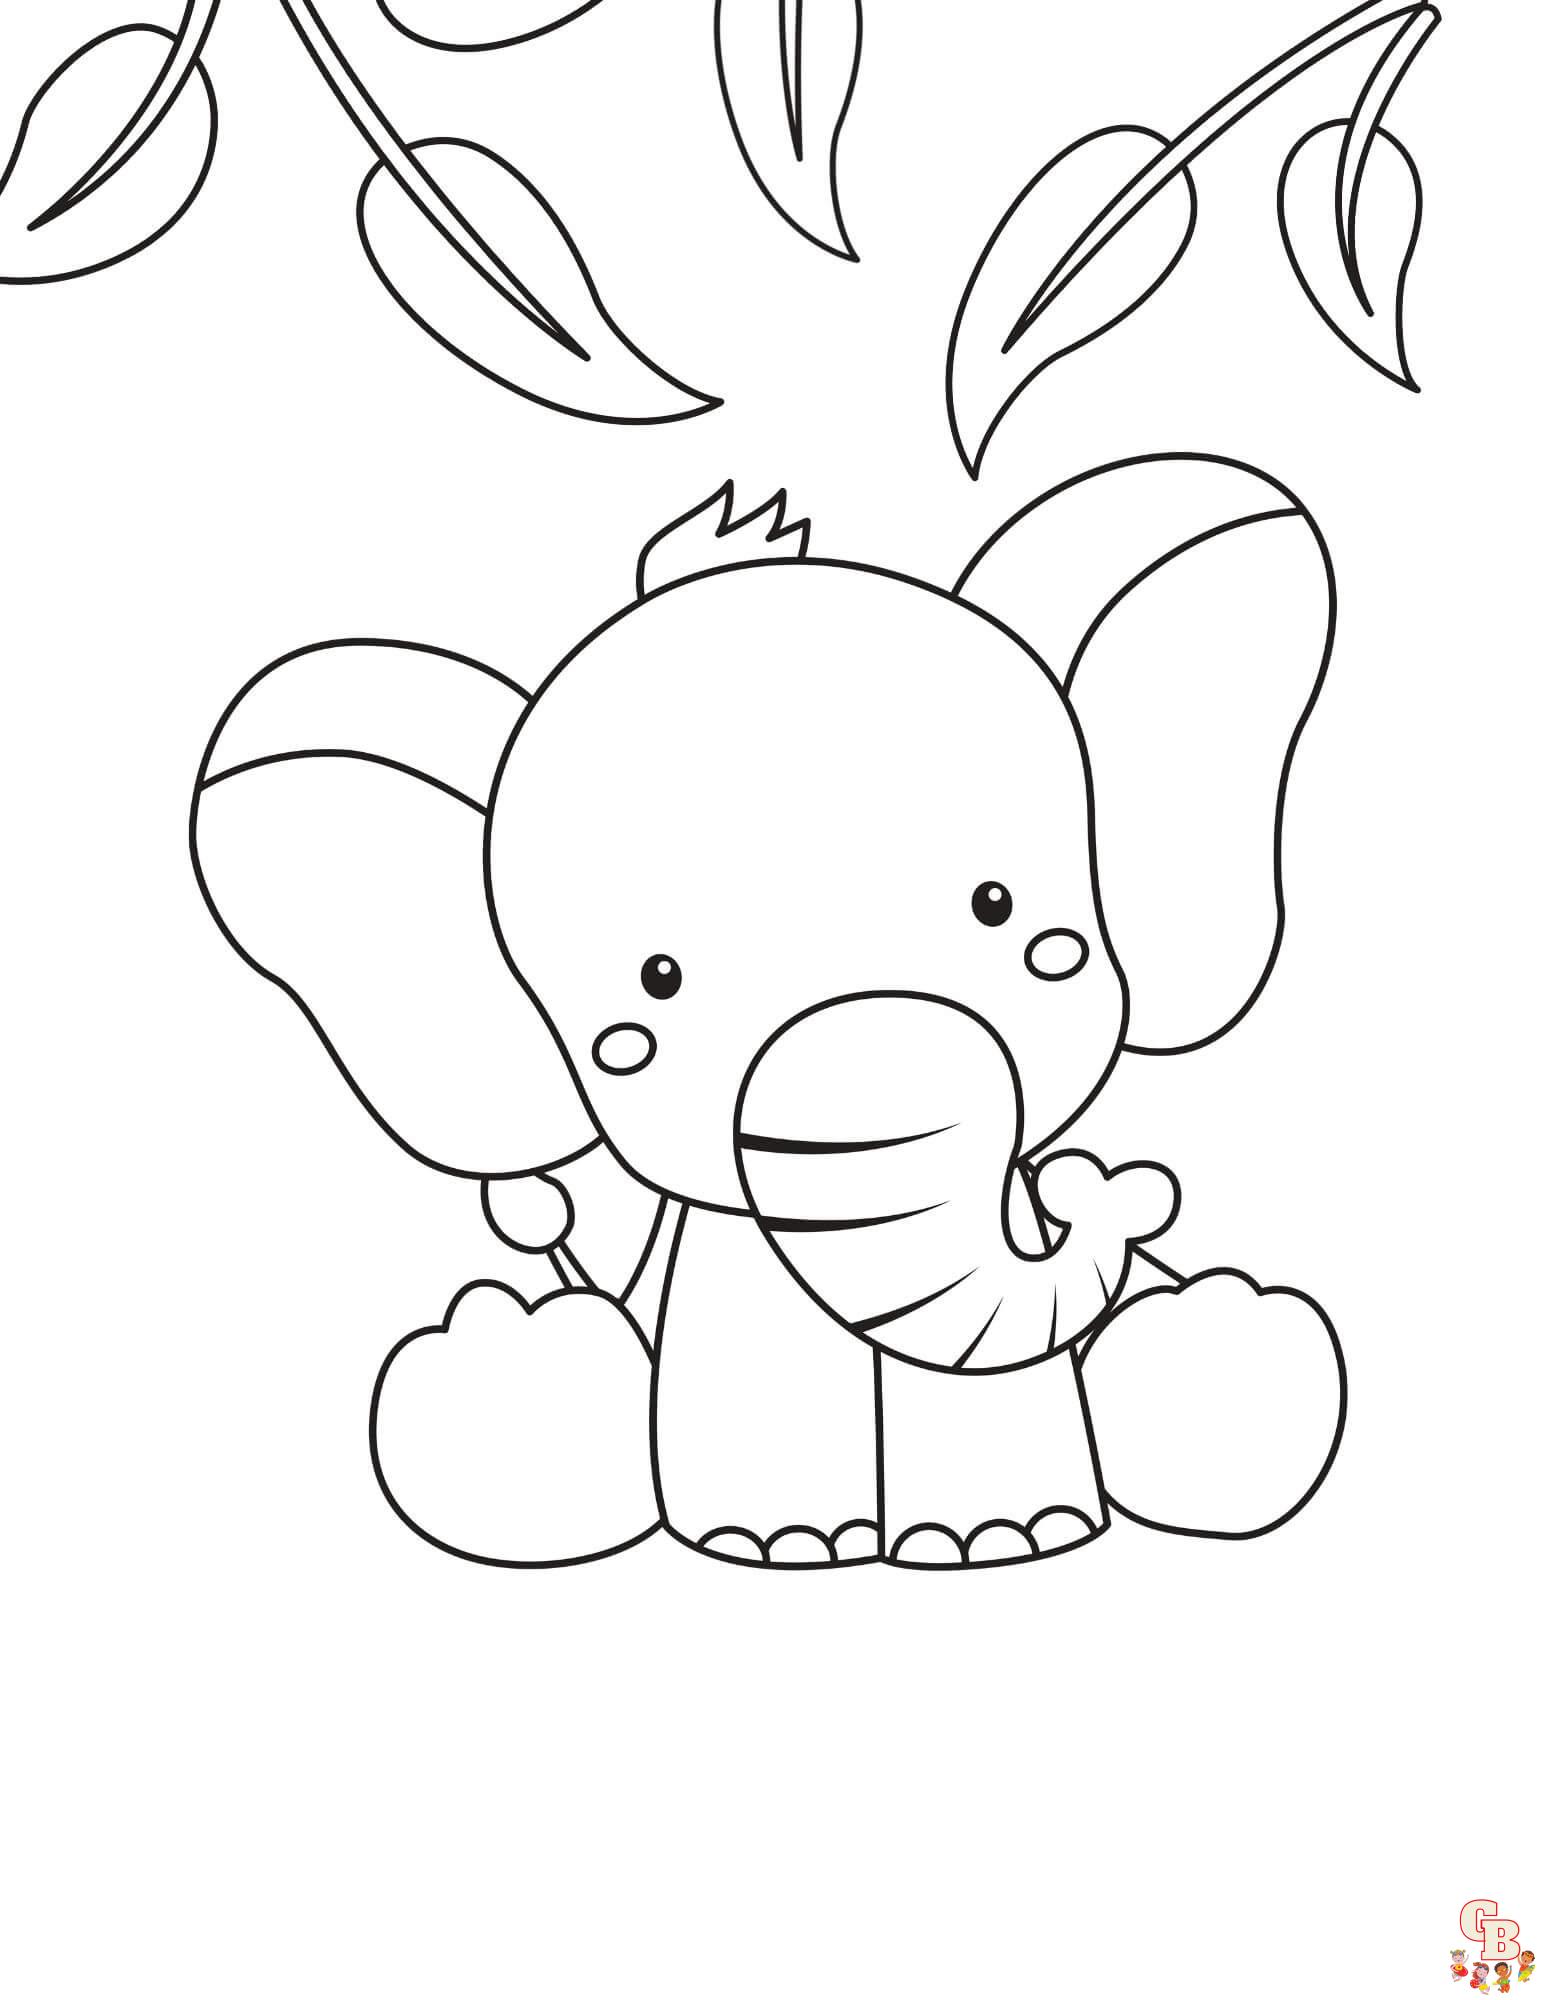 Cute Elephant Coloring Pages 5